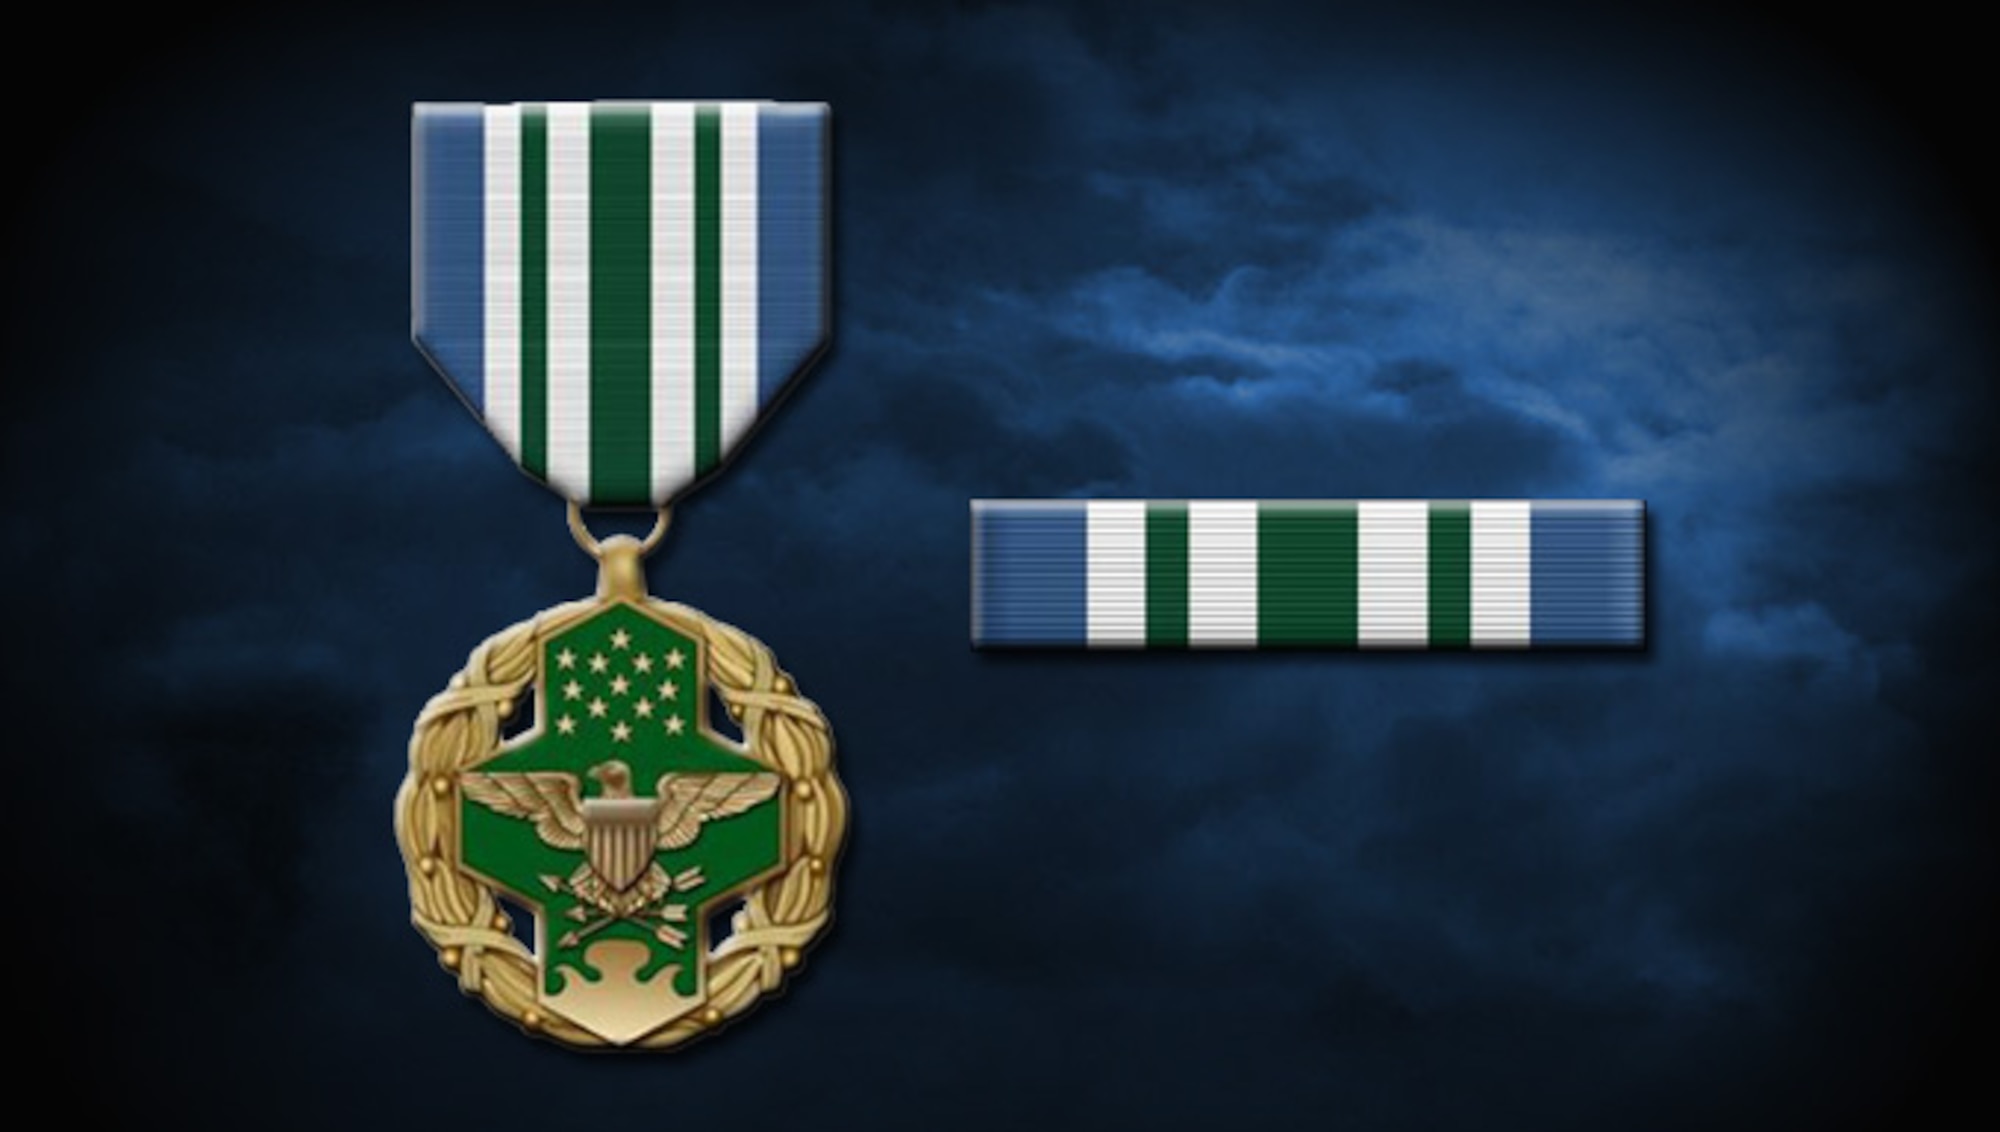 Air Medal > Air Force's Personnel Center > Display